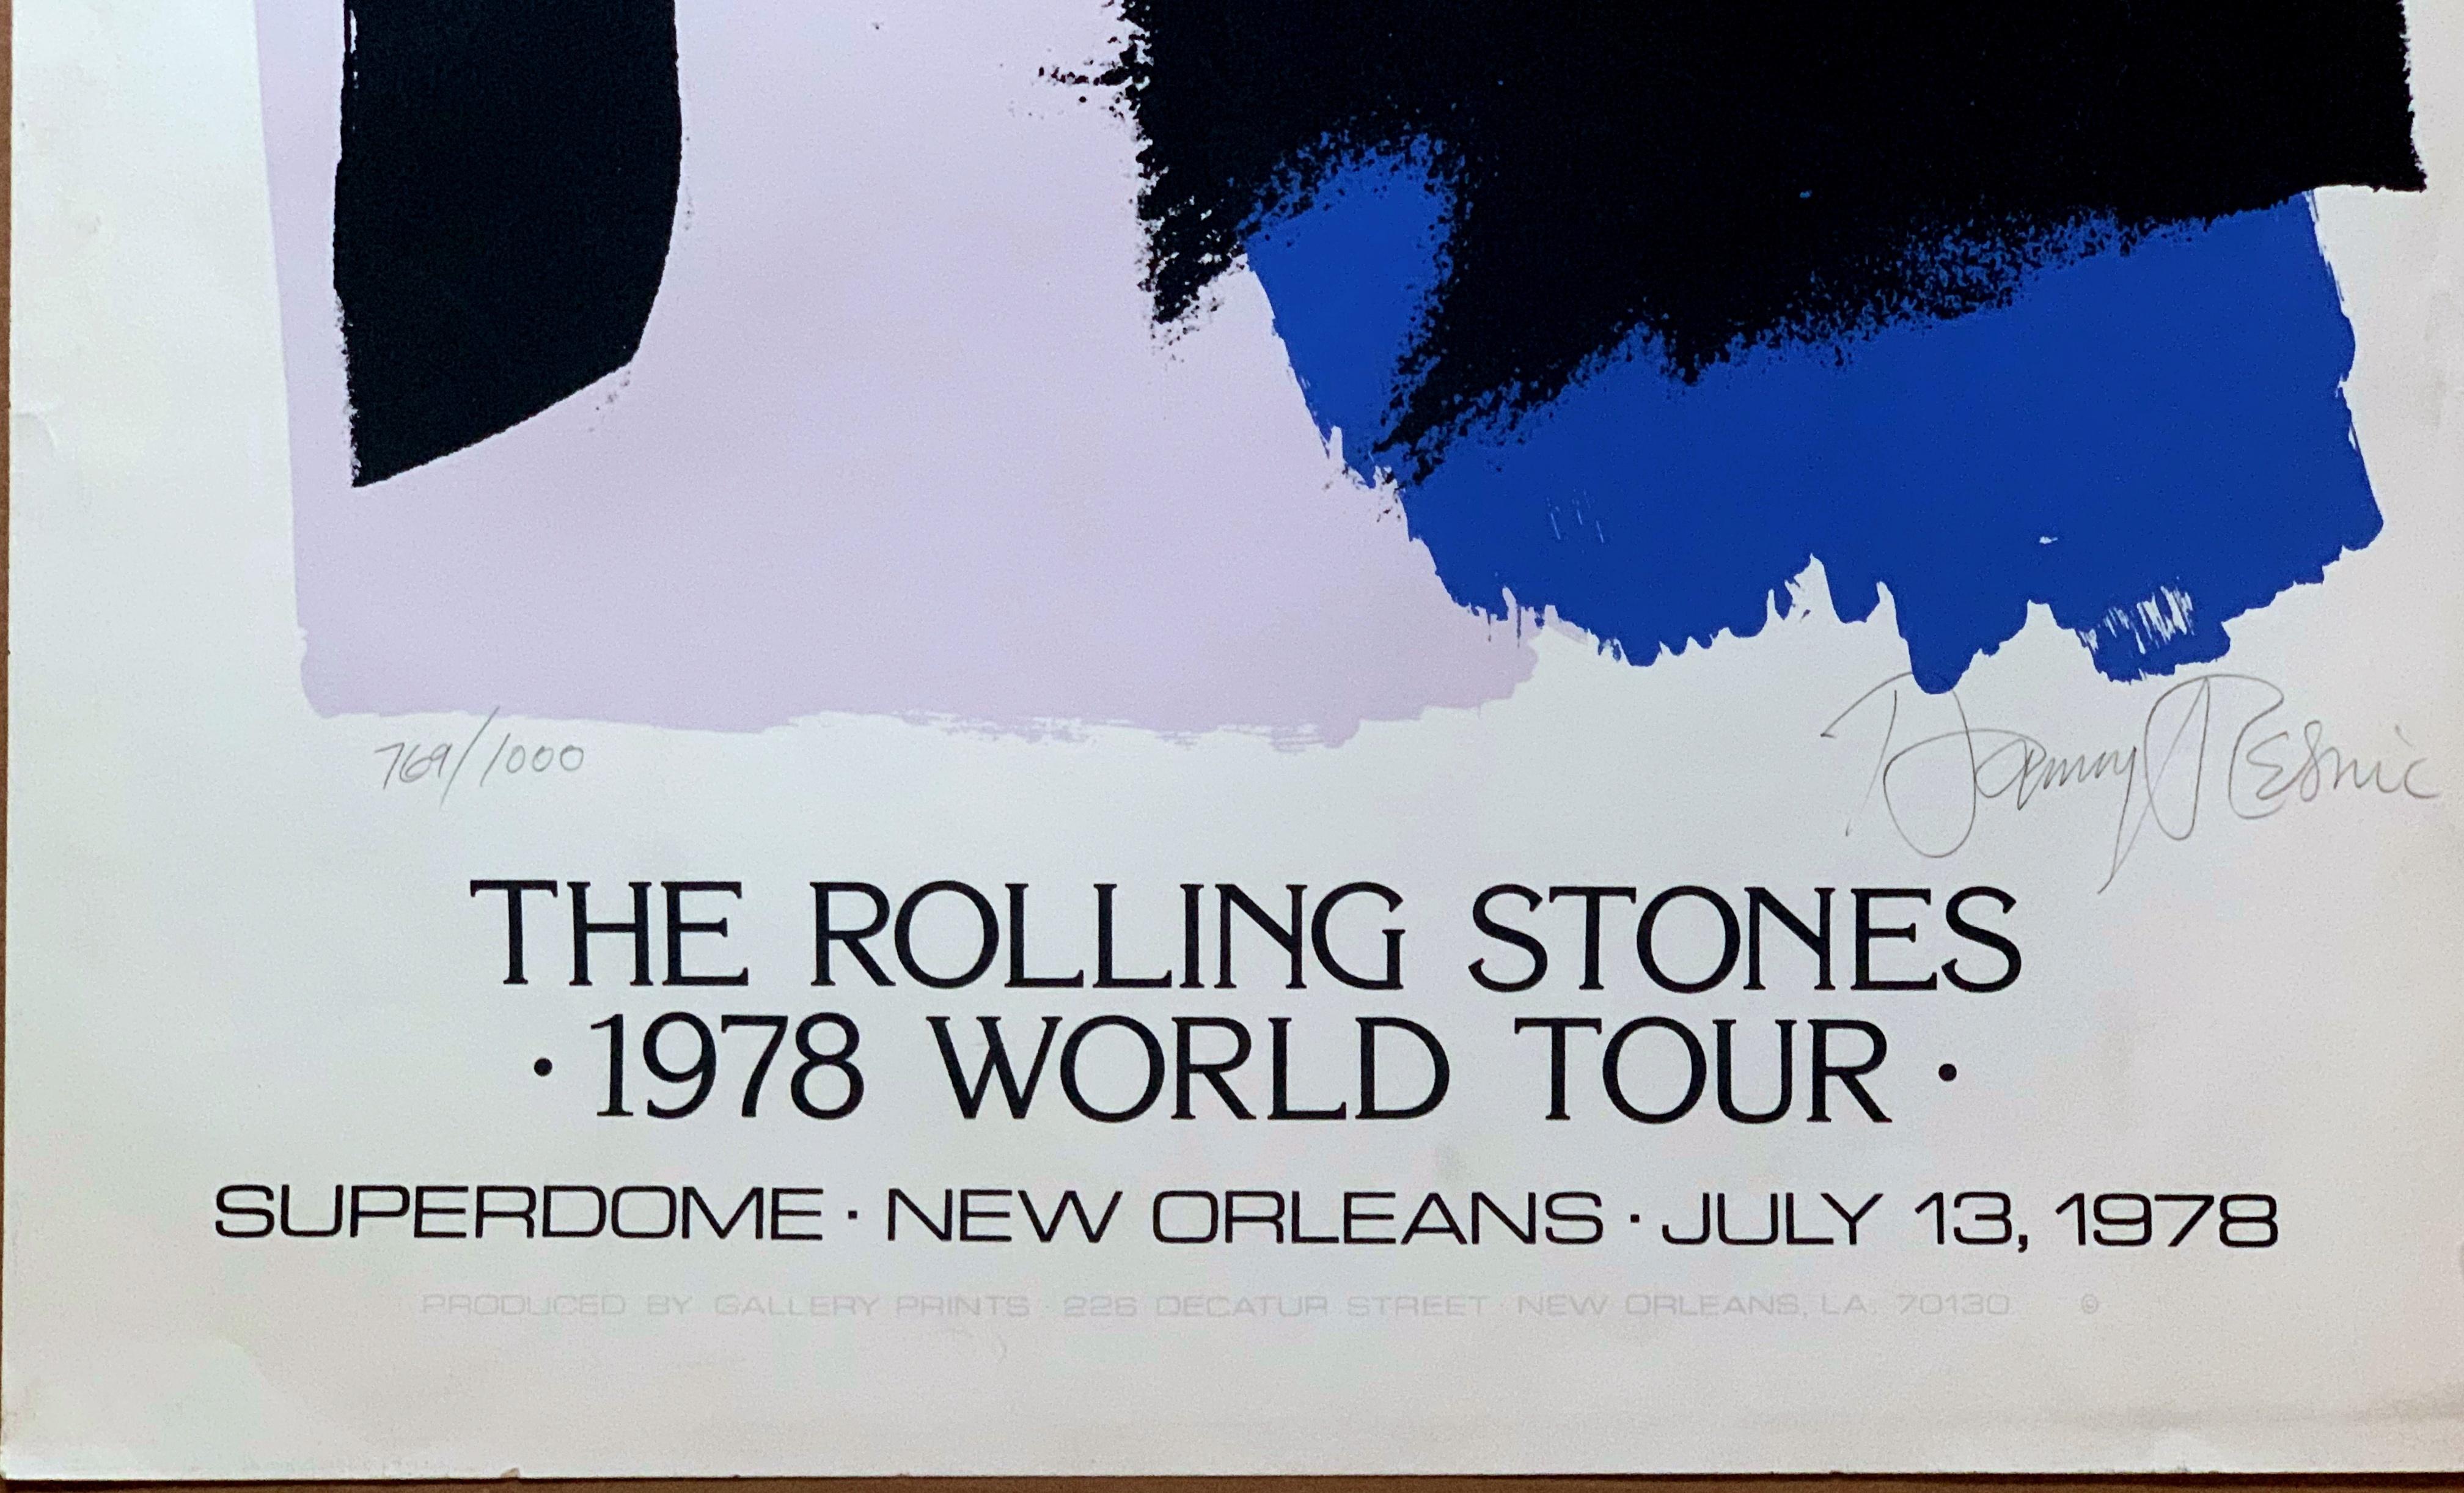 Danny Resnic
Mick Jagger, The Rolling Stones 1978 World Tour, 1978 (hand signed by Danny Resnic)
Offset Lithograph poster. 
Pencil signed and numbered 769/1000 by Danny Resnic on the front
Edition 769/1000
39 × 25 inches
Unframed
This is a true